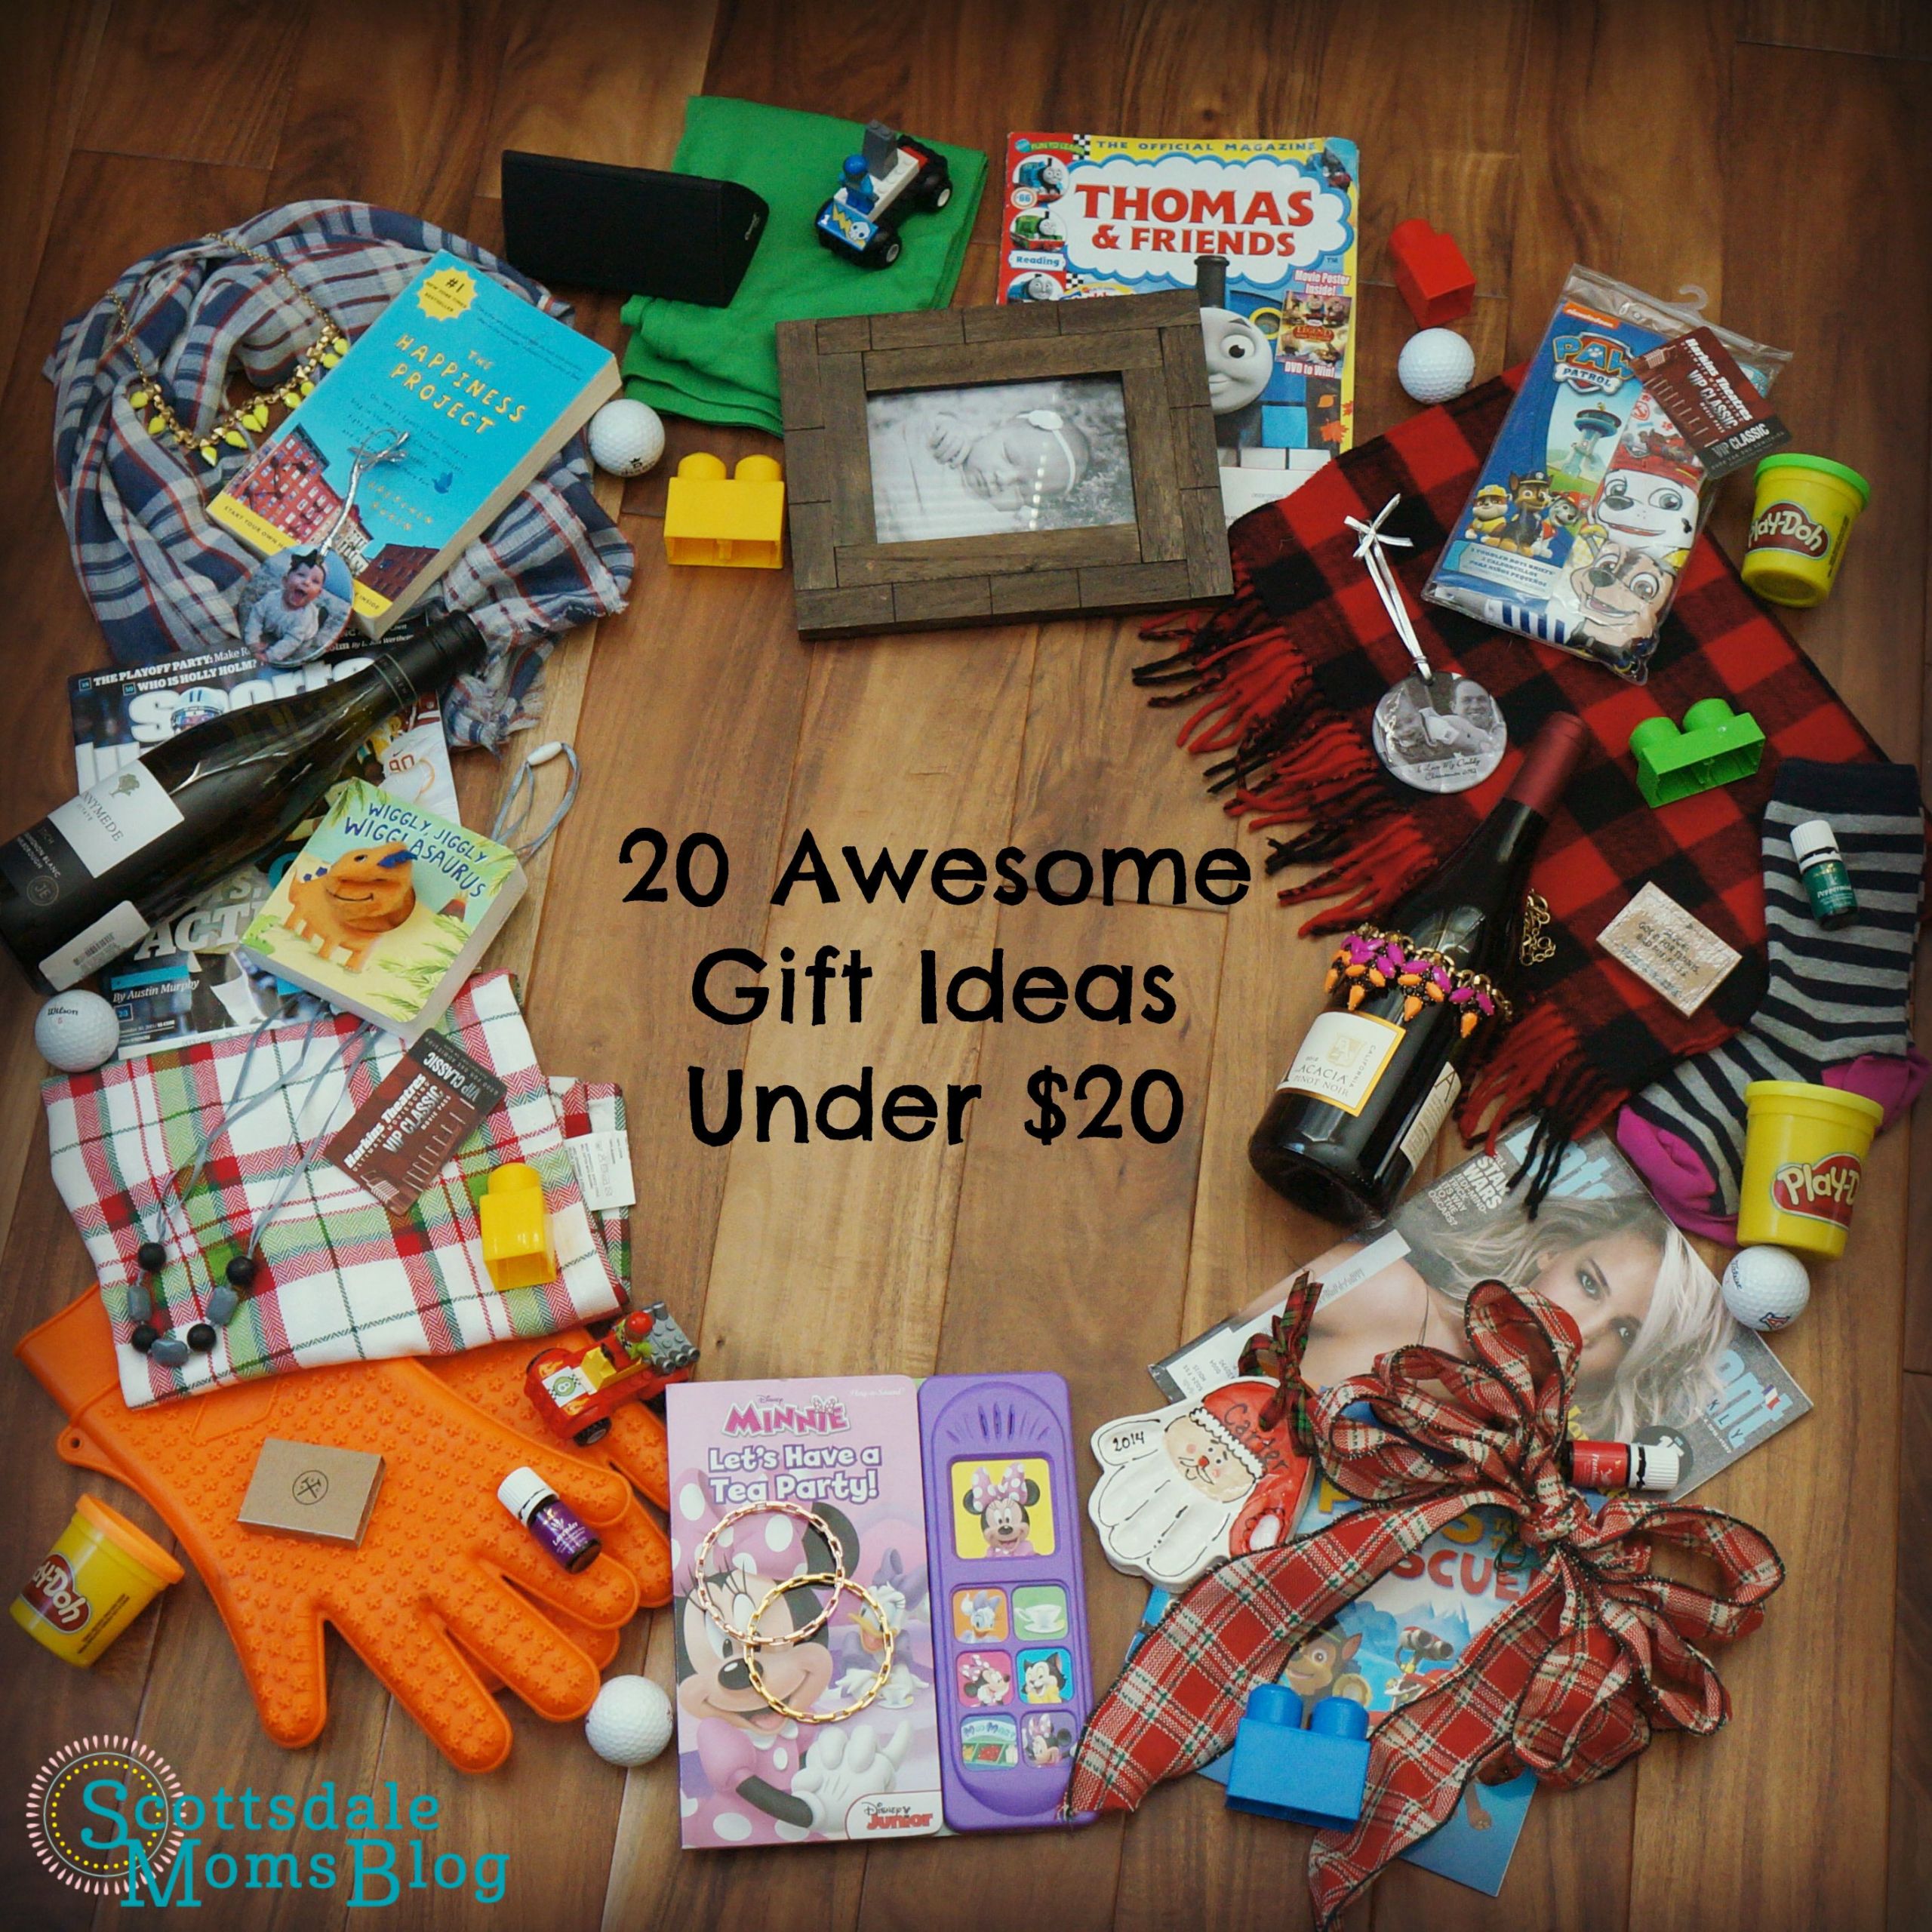 Holiday Gift Ideas Under $20
 20 Awesome Gift Ideas Under $20